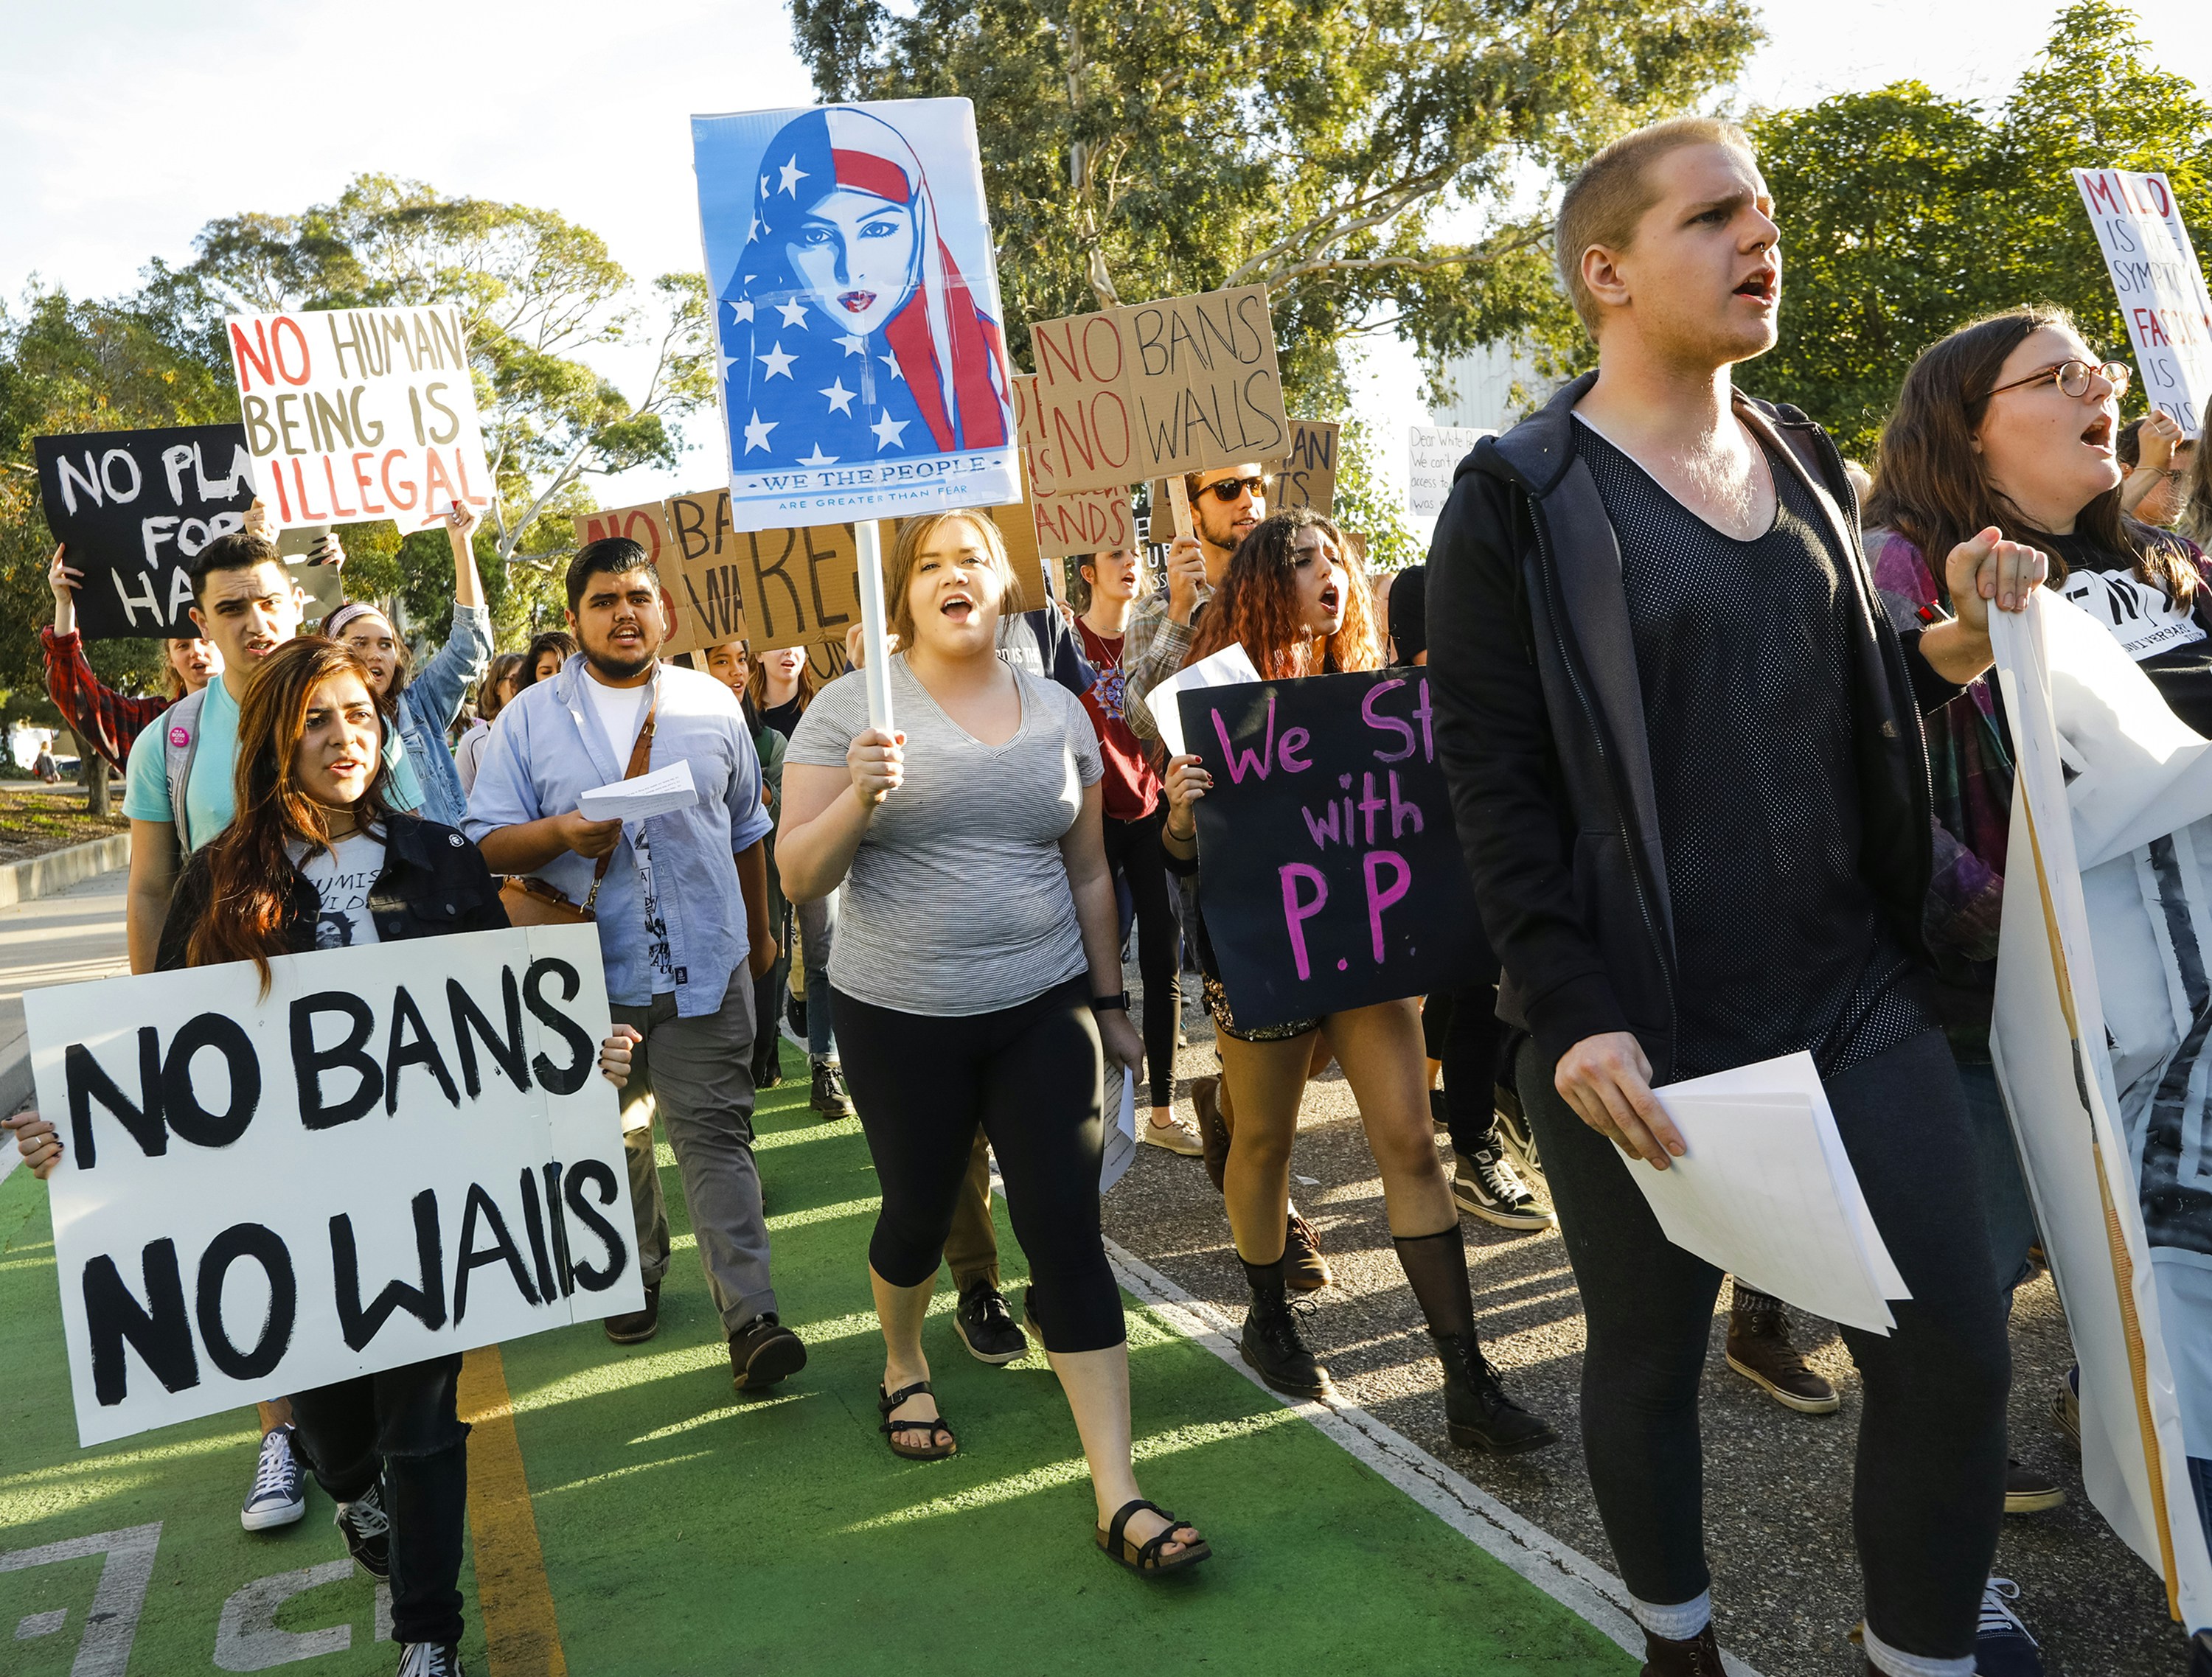 California Polytechnic State University students protest President Donald Trump's administration policies with their march through campus coinciding with a talk at the university by the polarizing Breitbart News editor, Milo Yiannopoulos in San Luis Obispo, Calif., Tuesday, Jan. 31, 2017. (Joe Johnston/The Tribune (of San Luis Obispo) via AP)